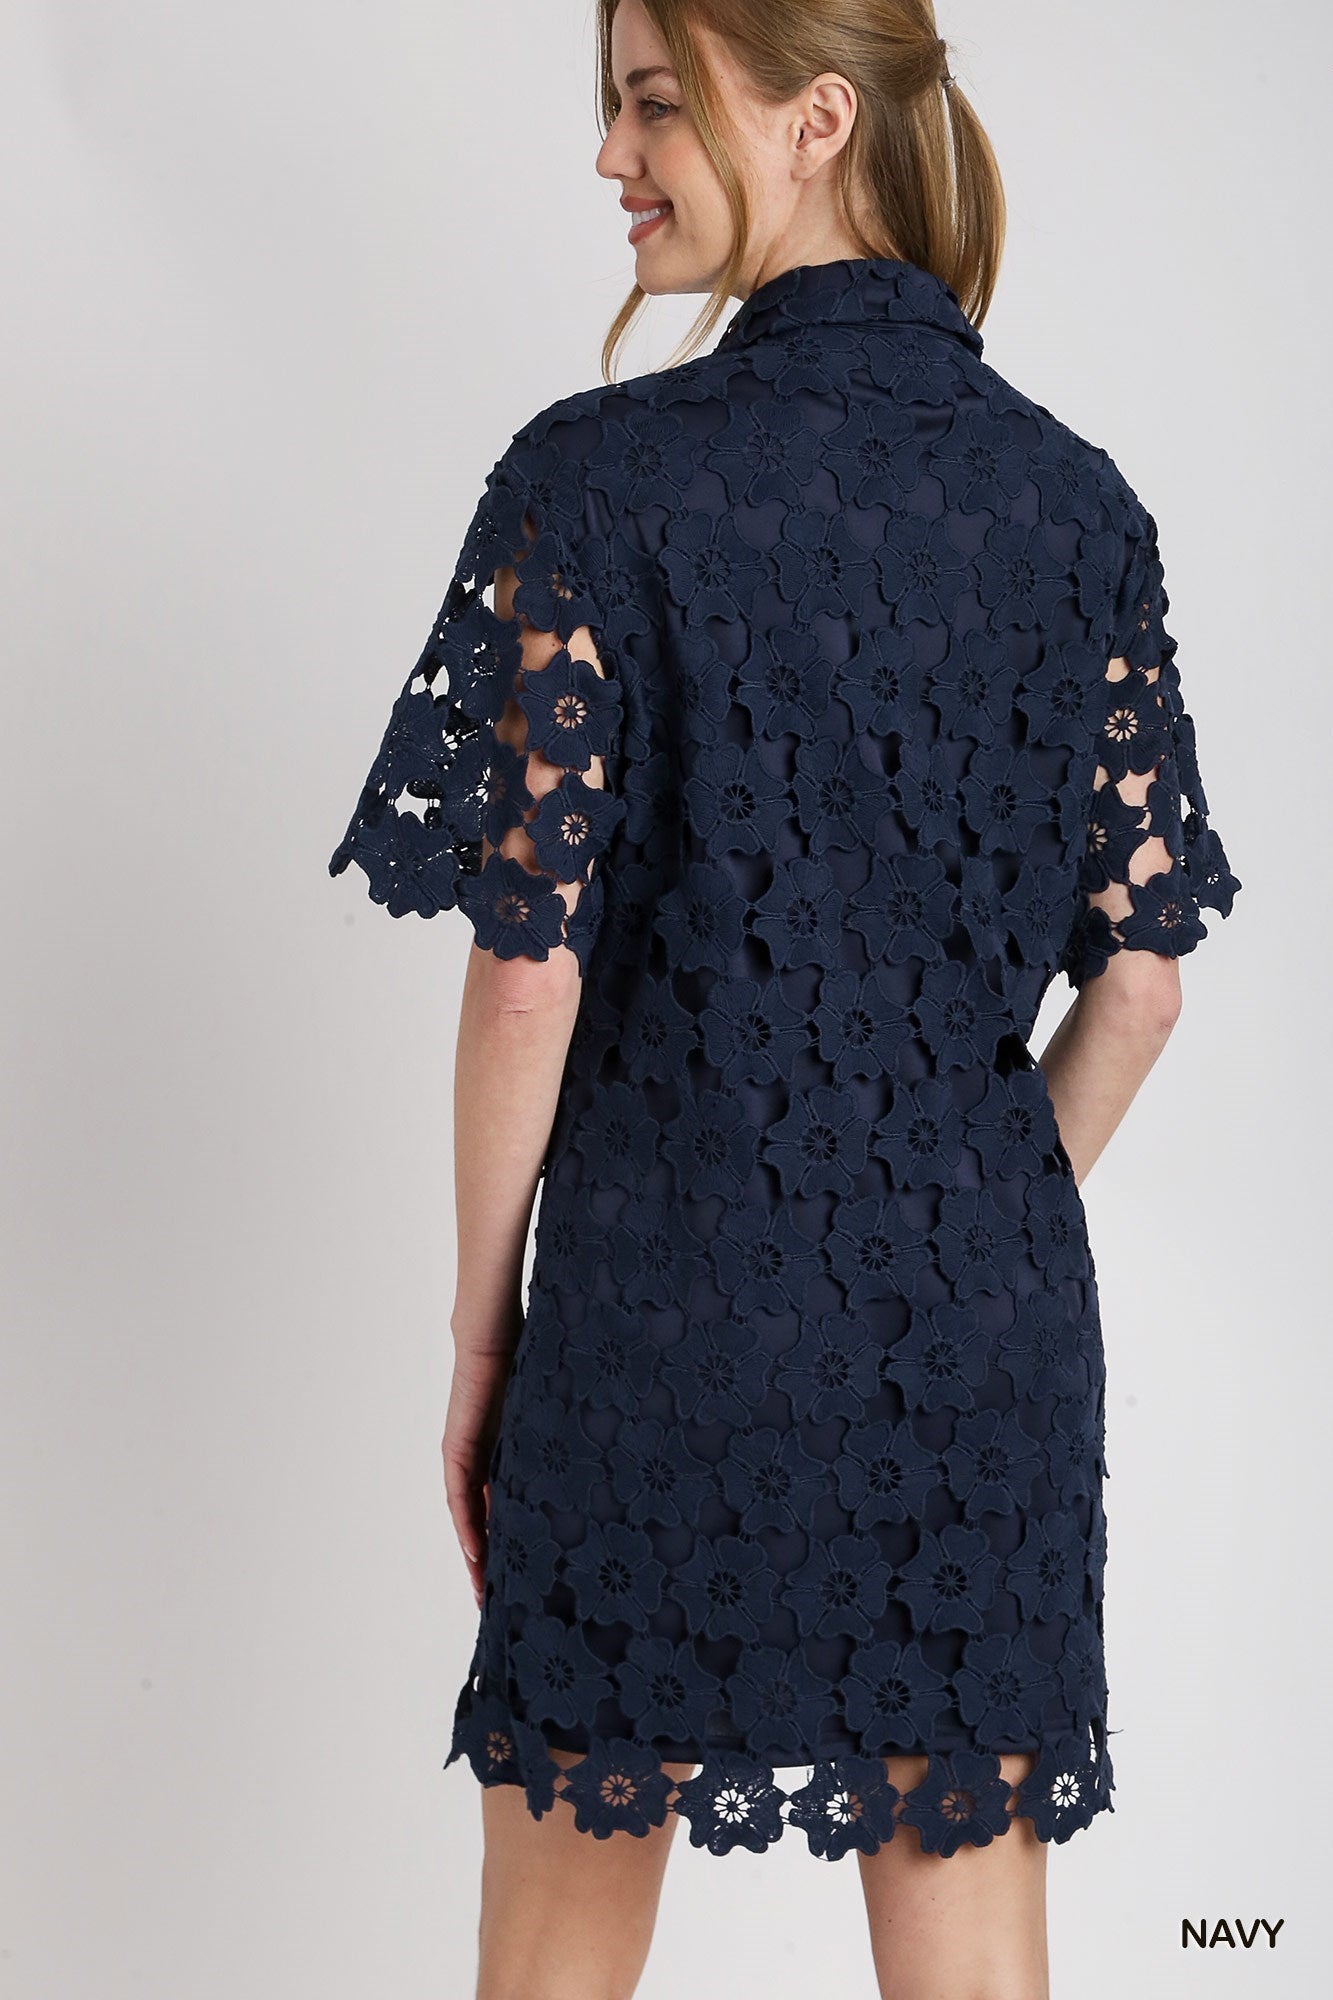 FLORAL LACE BUTTON DOWN COLLARED DRESS - NAVY